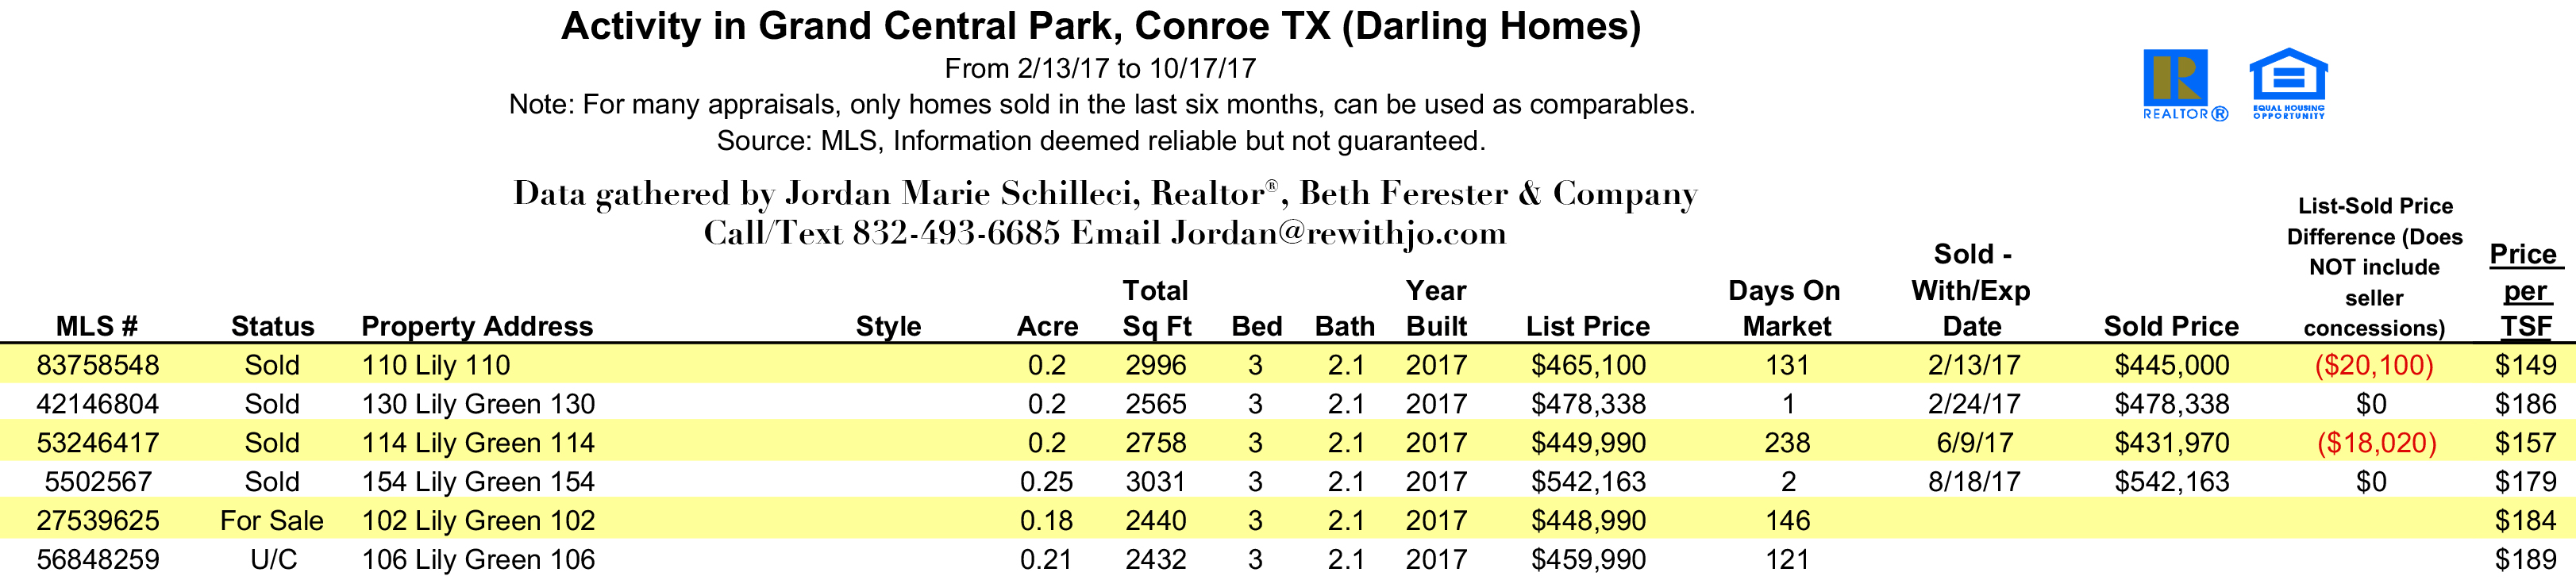 Darling Homes Grand Central Park Sold Data for 2017 through mid October